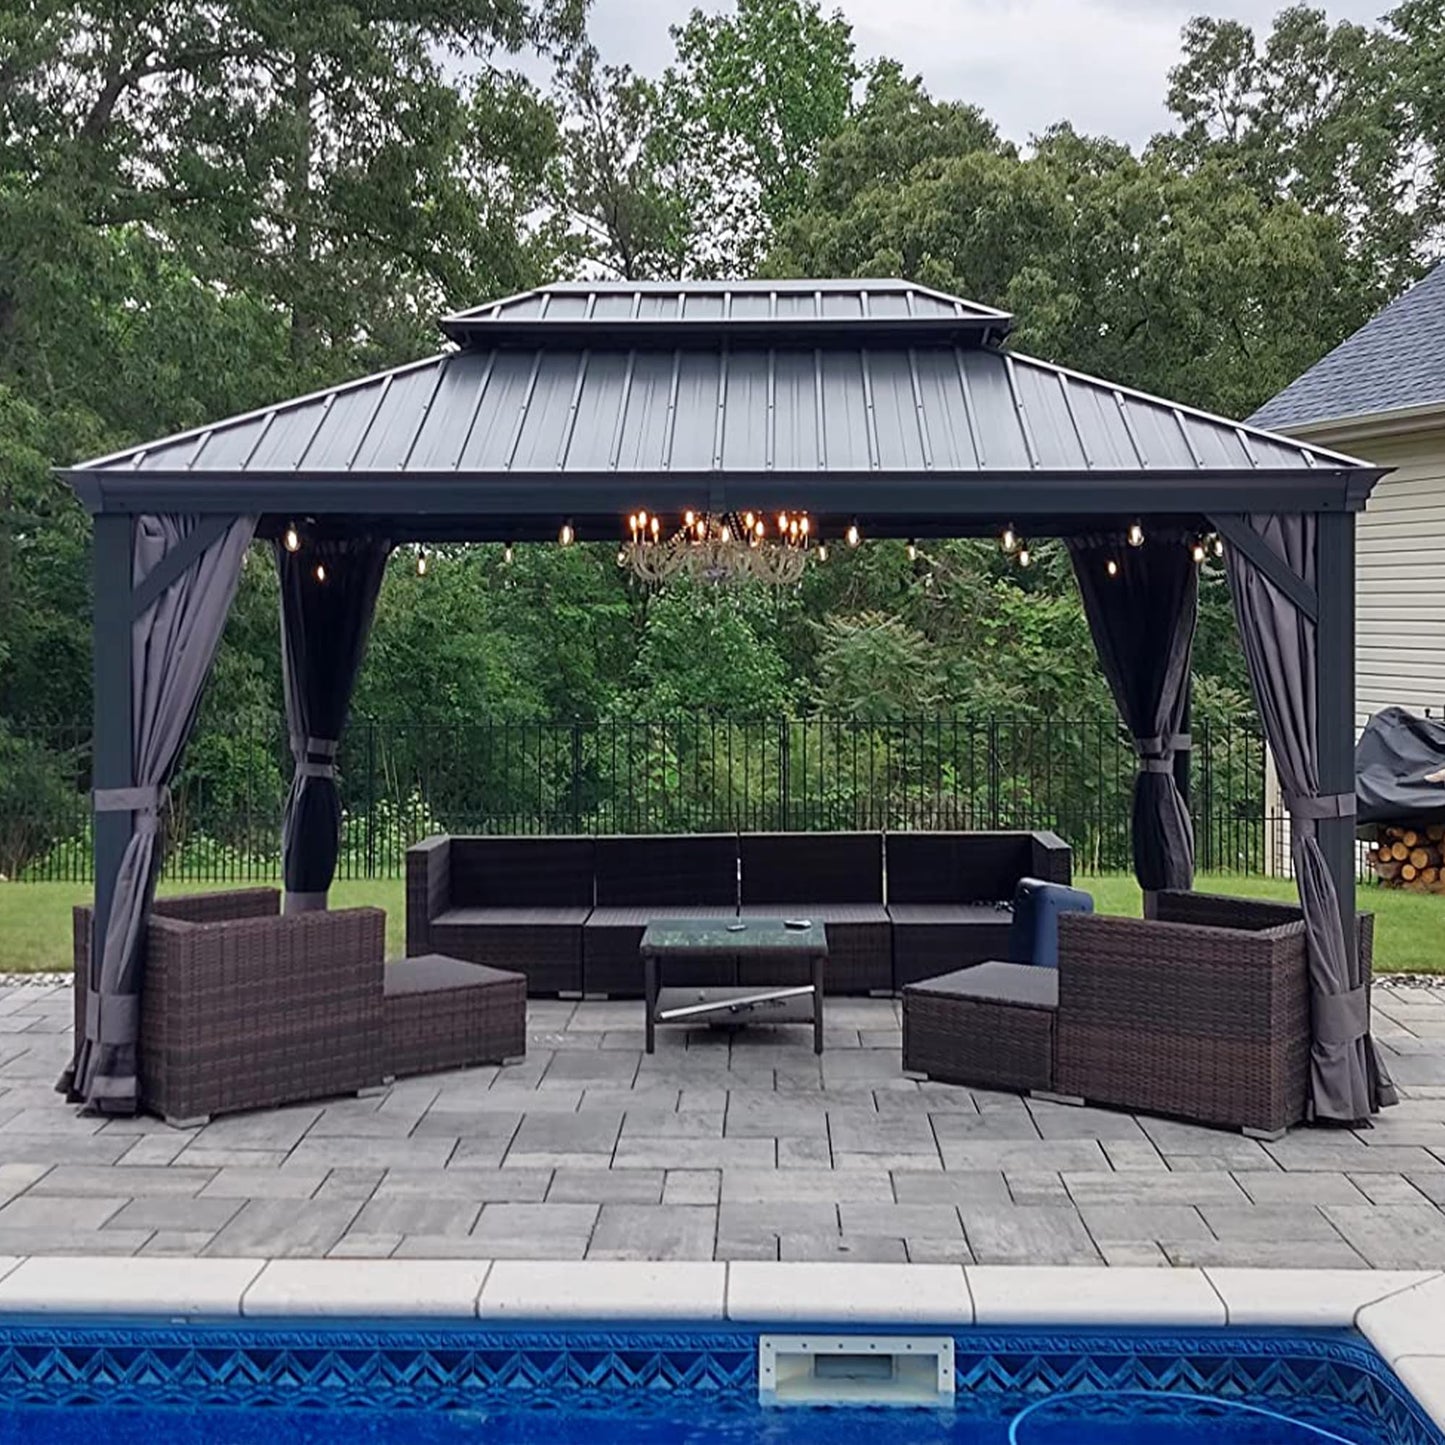 PURPLE LEAF 10' X 14' Permanent Hardtop Gazebo Aluminum Gazebo with Galvanized Steel Double Roof for Patio Lawn and Garden, Curtains and Netting Included, Grey